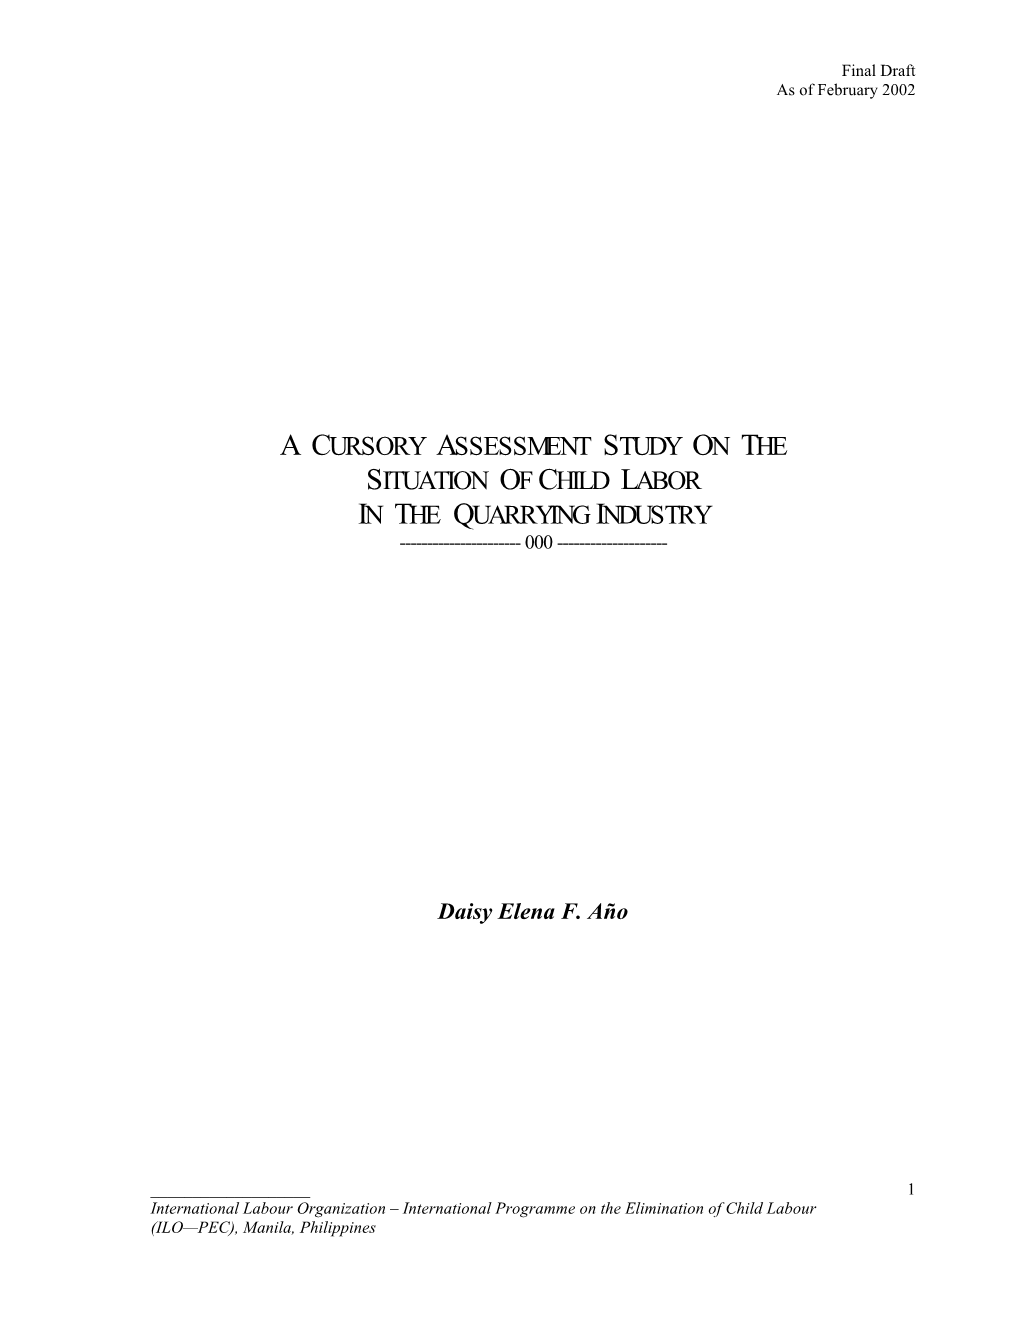 A Cursory Assessment Study on the Situation of Child Labour in The